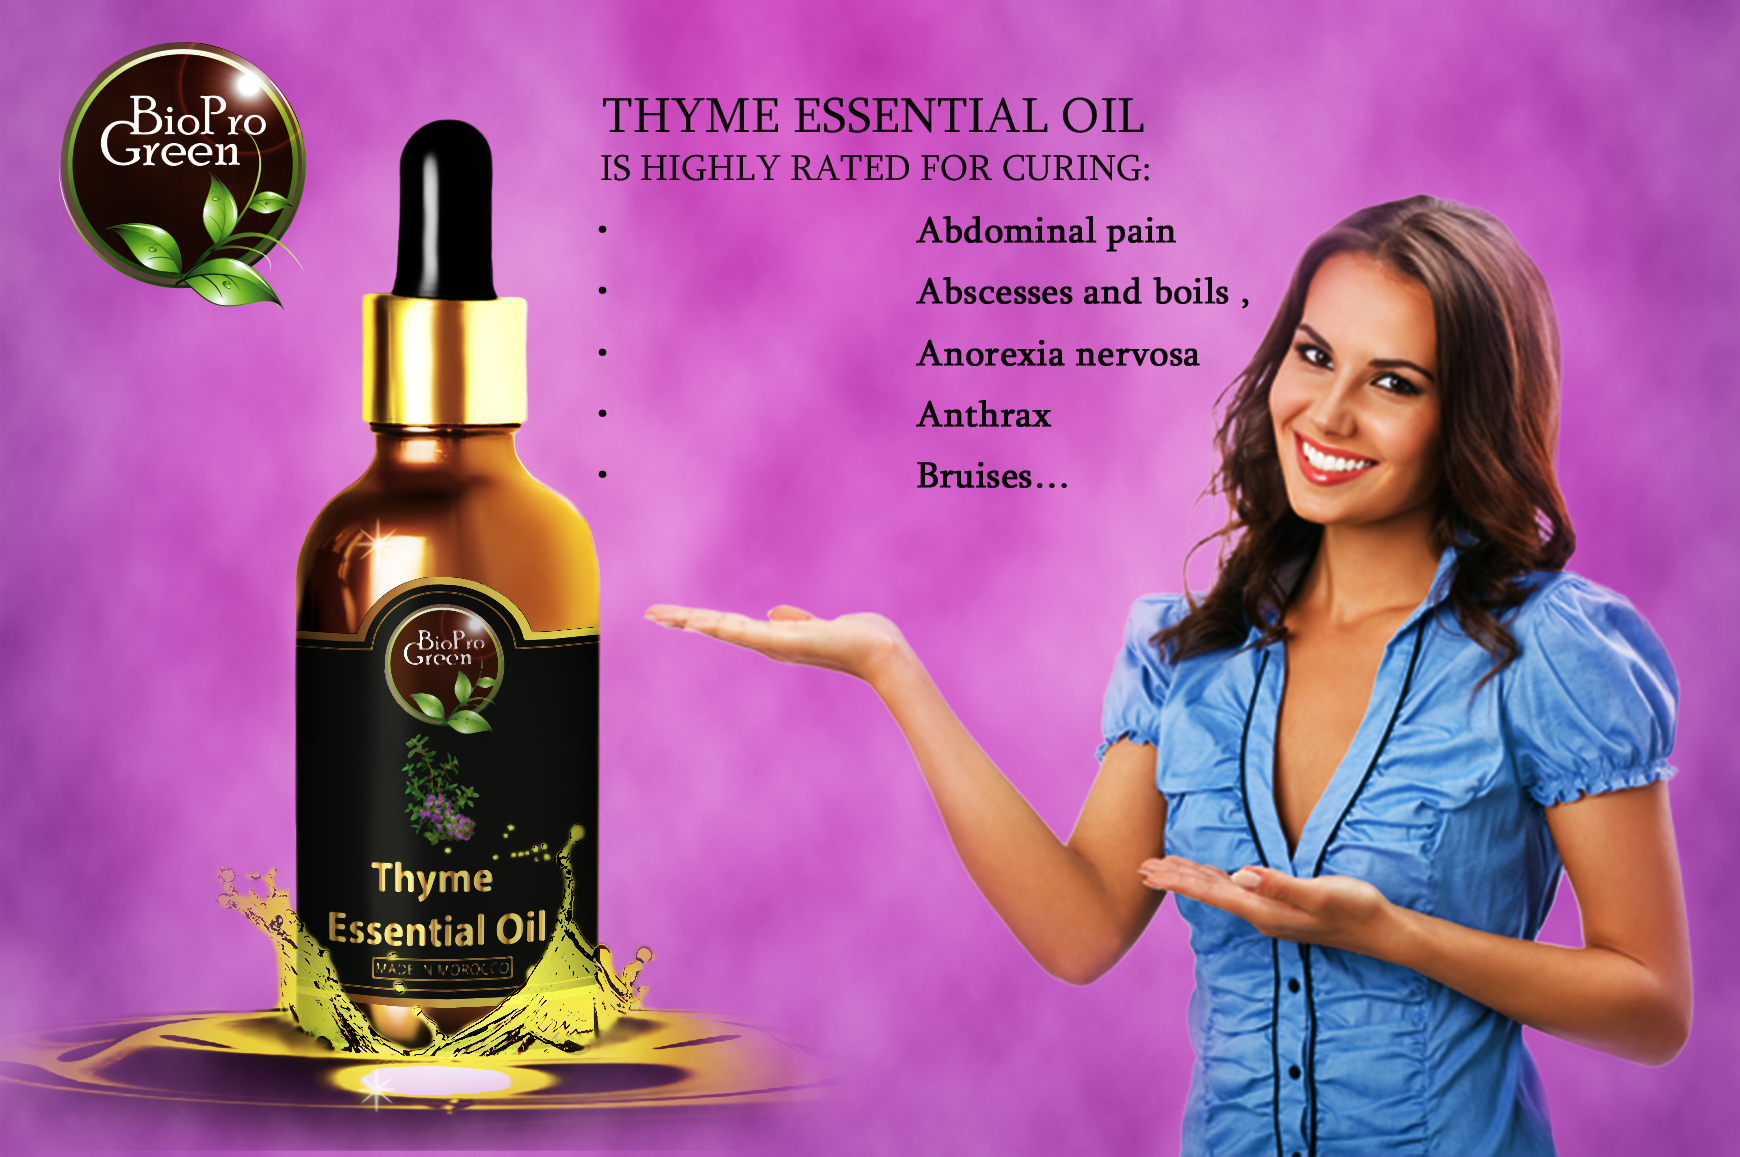 thyme essential oil Natural Pure 